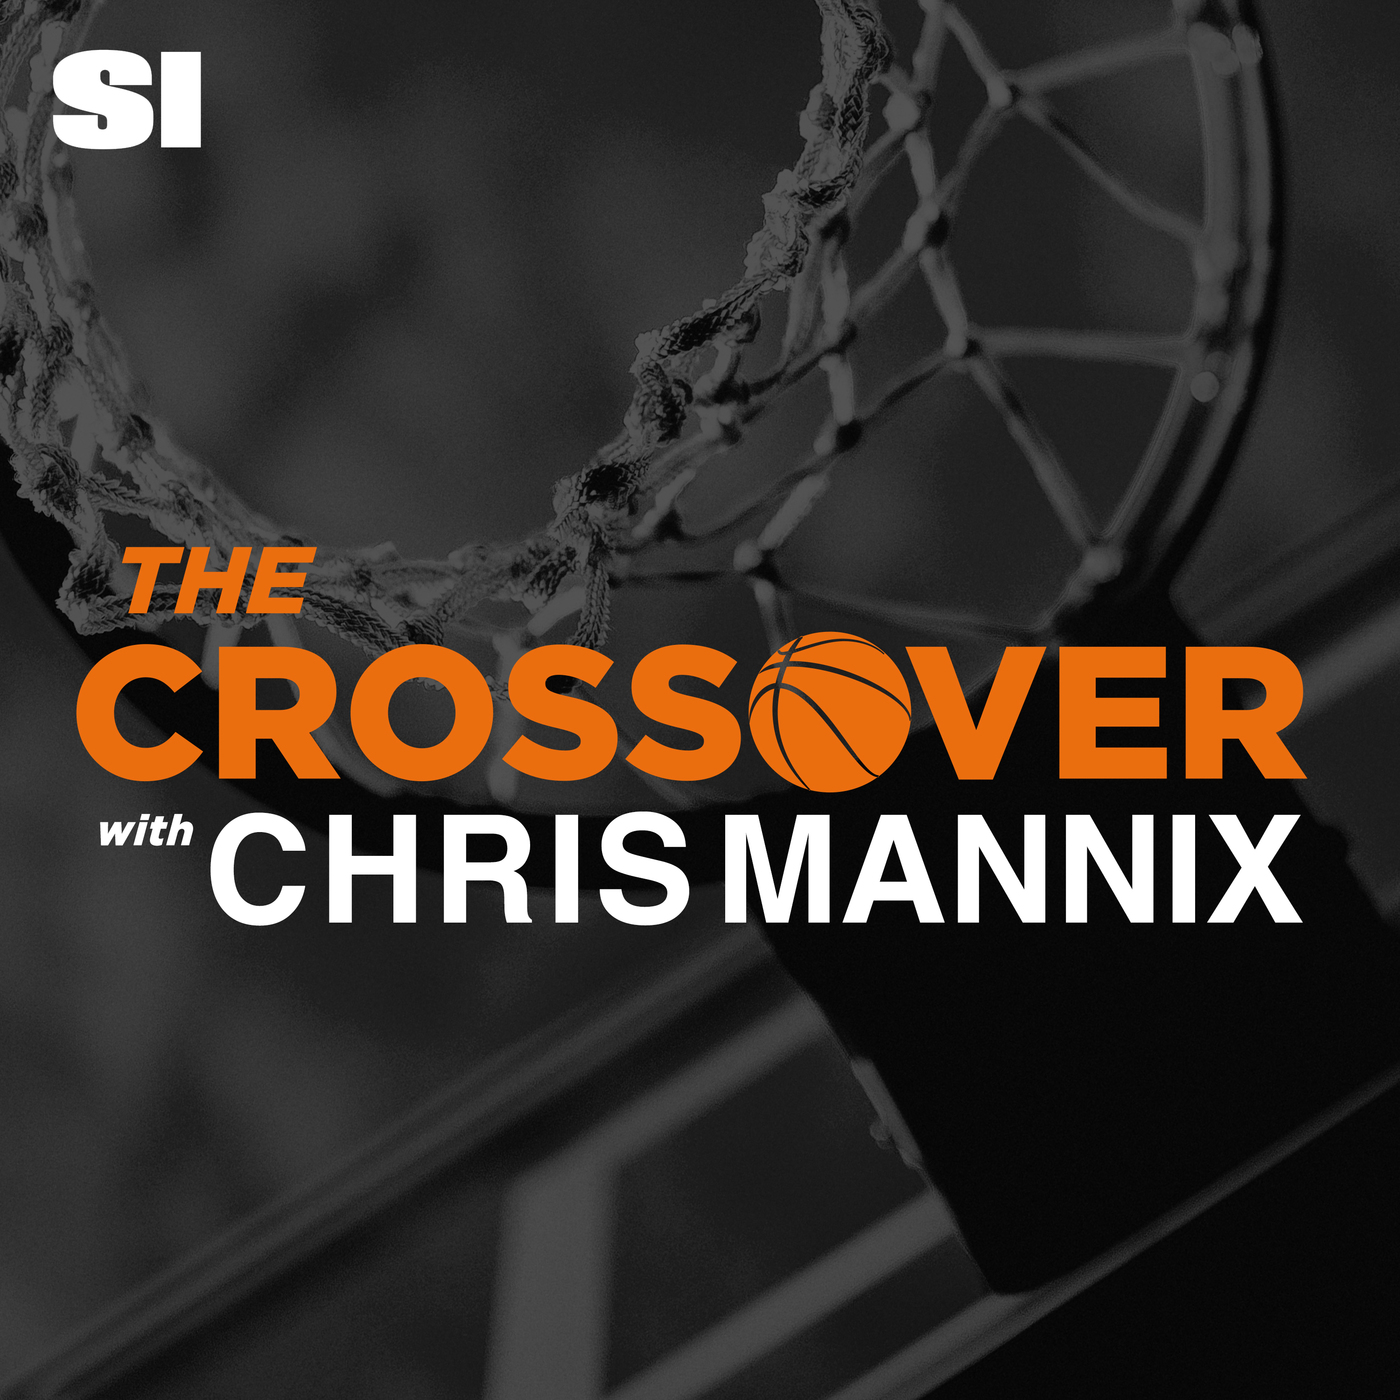 Fresh update on "lebron james" discussed on The Crossover NBA Show with Chris Mannix